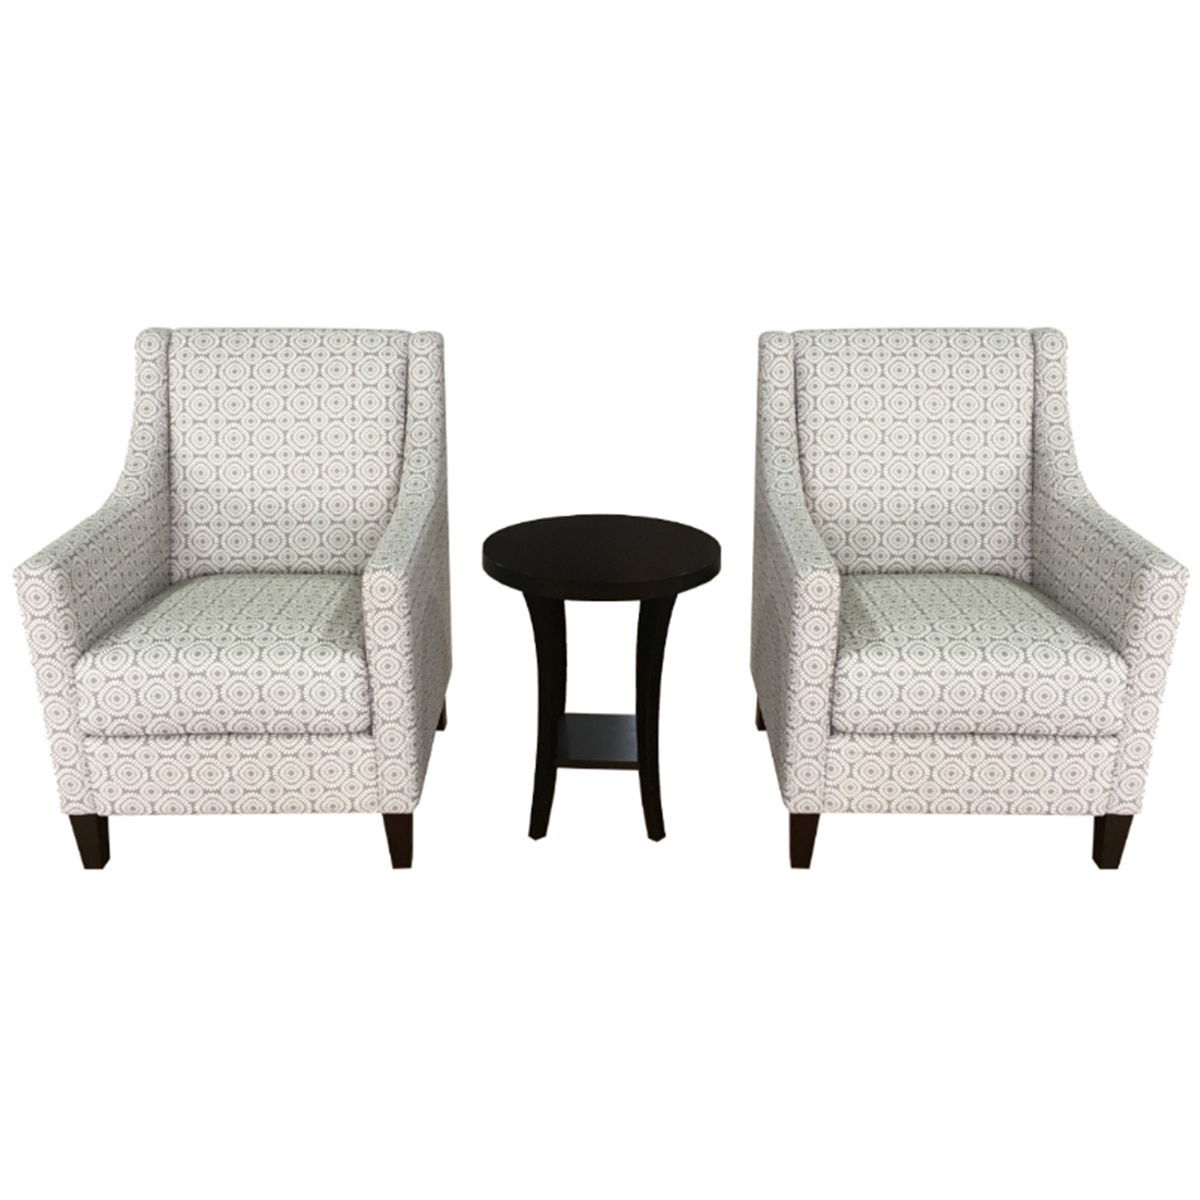 LF Fabric Accent Chairs & Table 3 piece Set